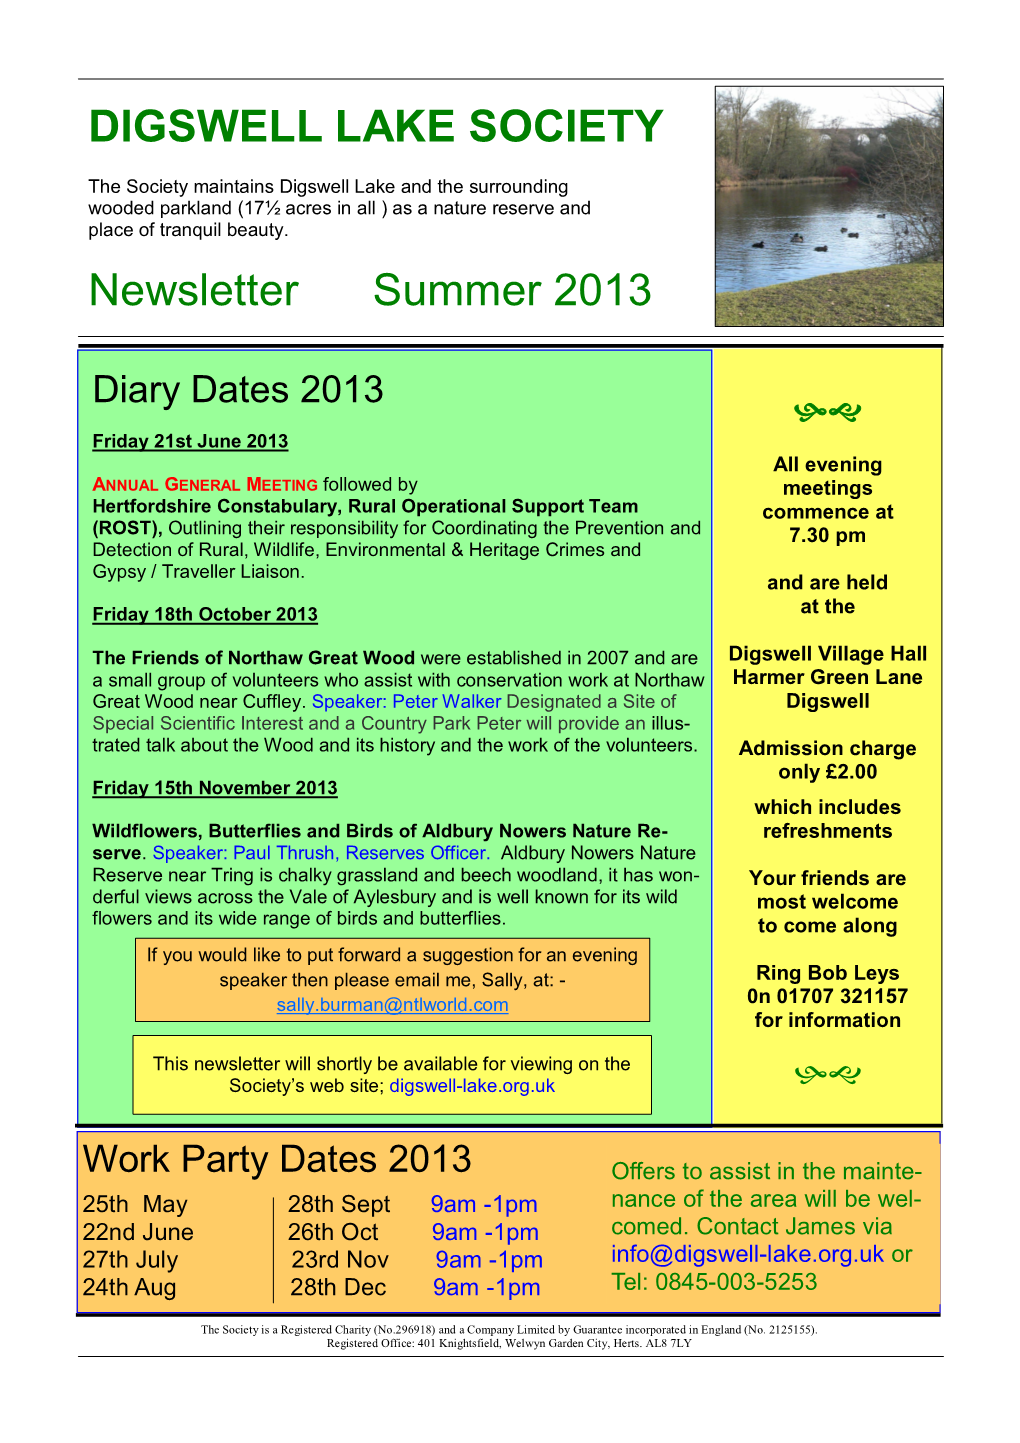 DIGSWELL LAKE SOCIETY Newsletter Summer 2013